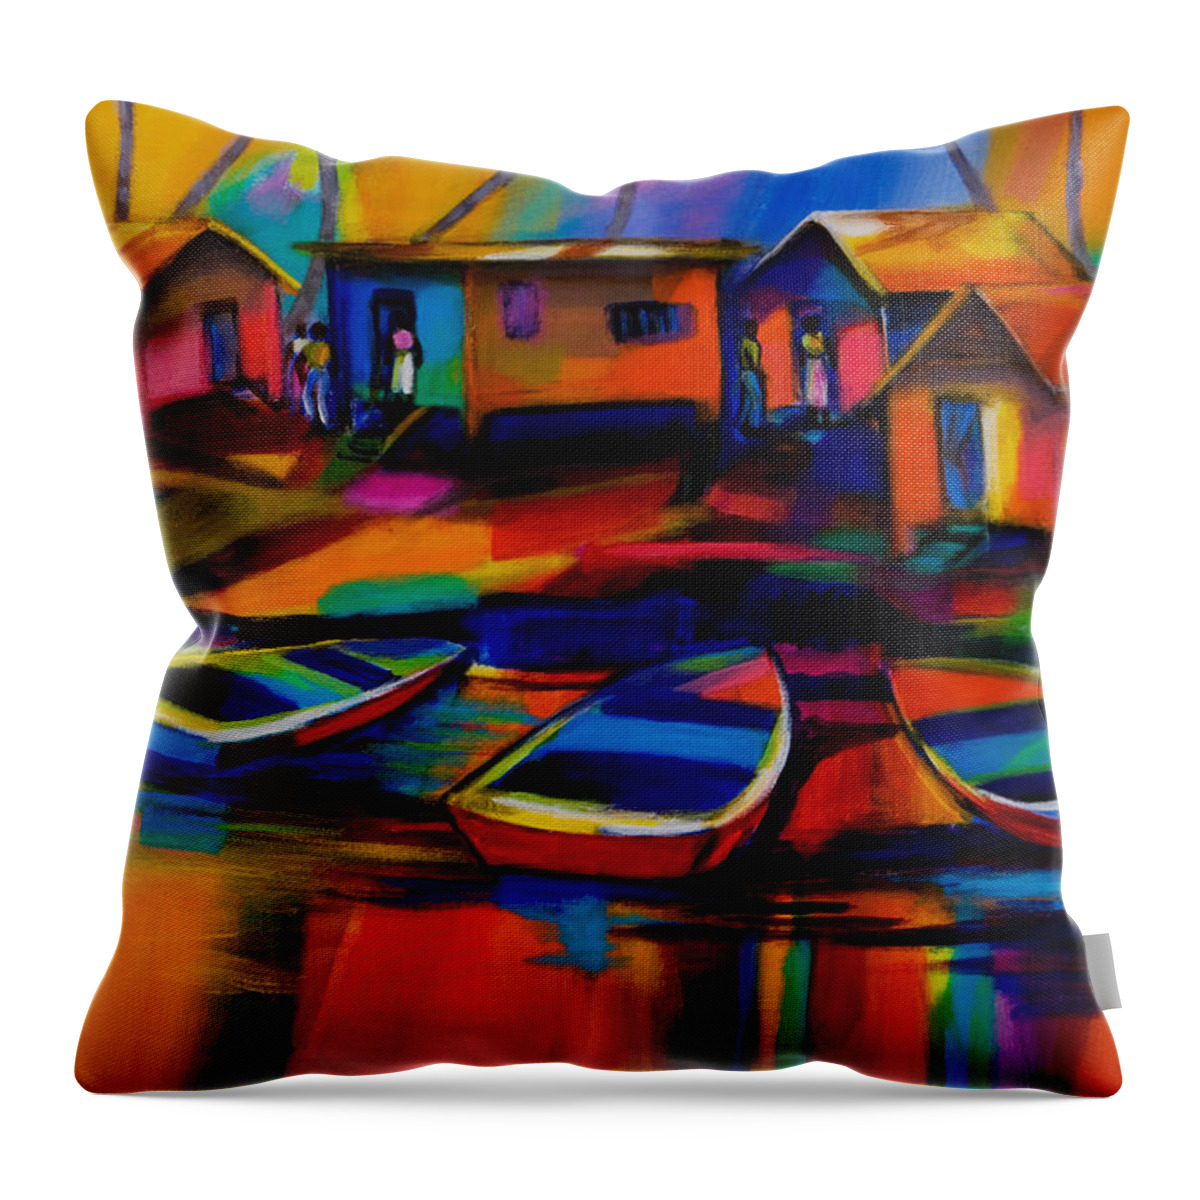 Fishing Throw Pillow featuring the painting Fishing Village by Cynthia McLean